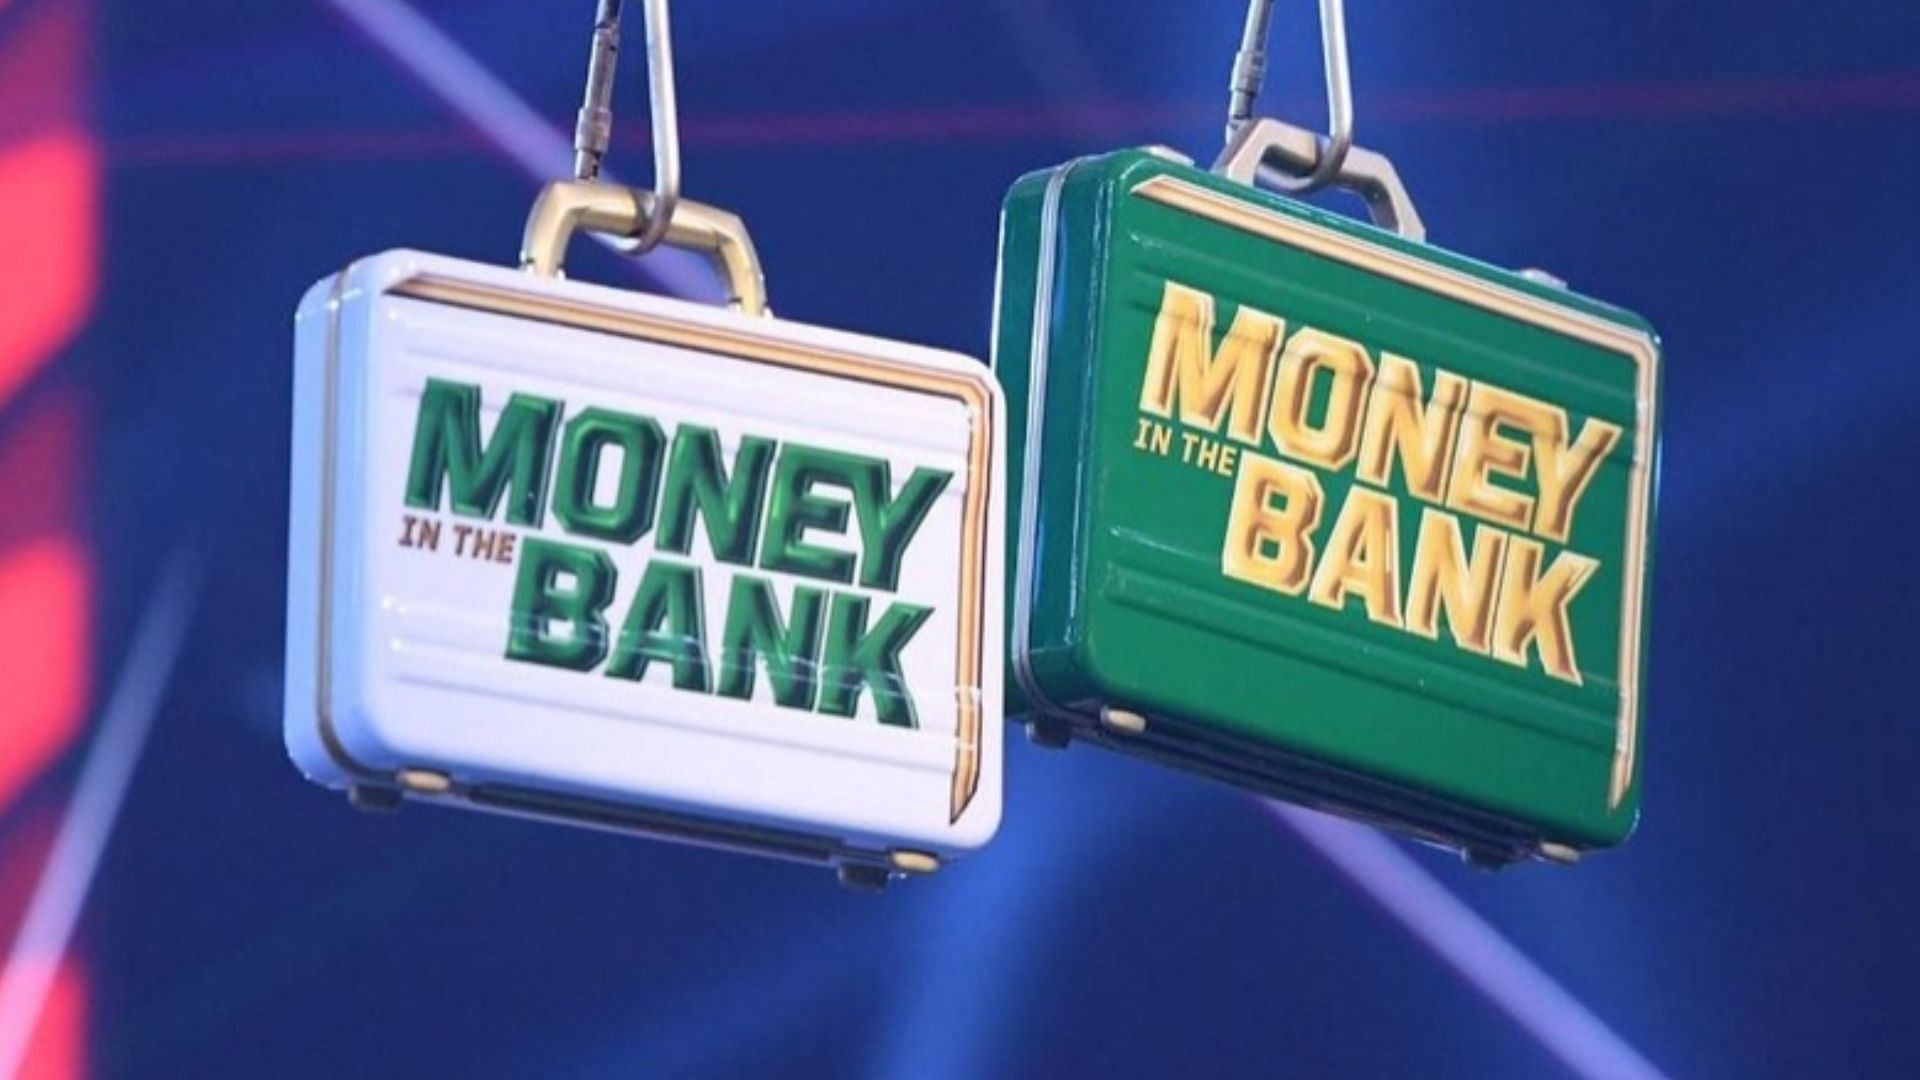 Money in the Bank got its own pay-per-view in 2010.